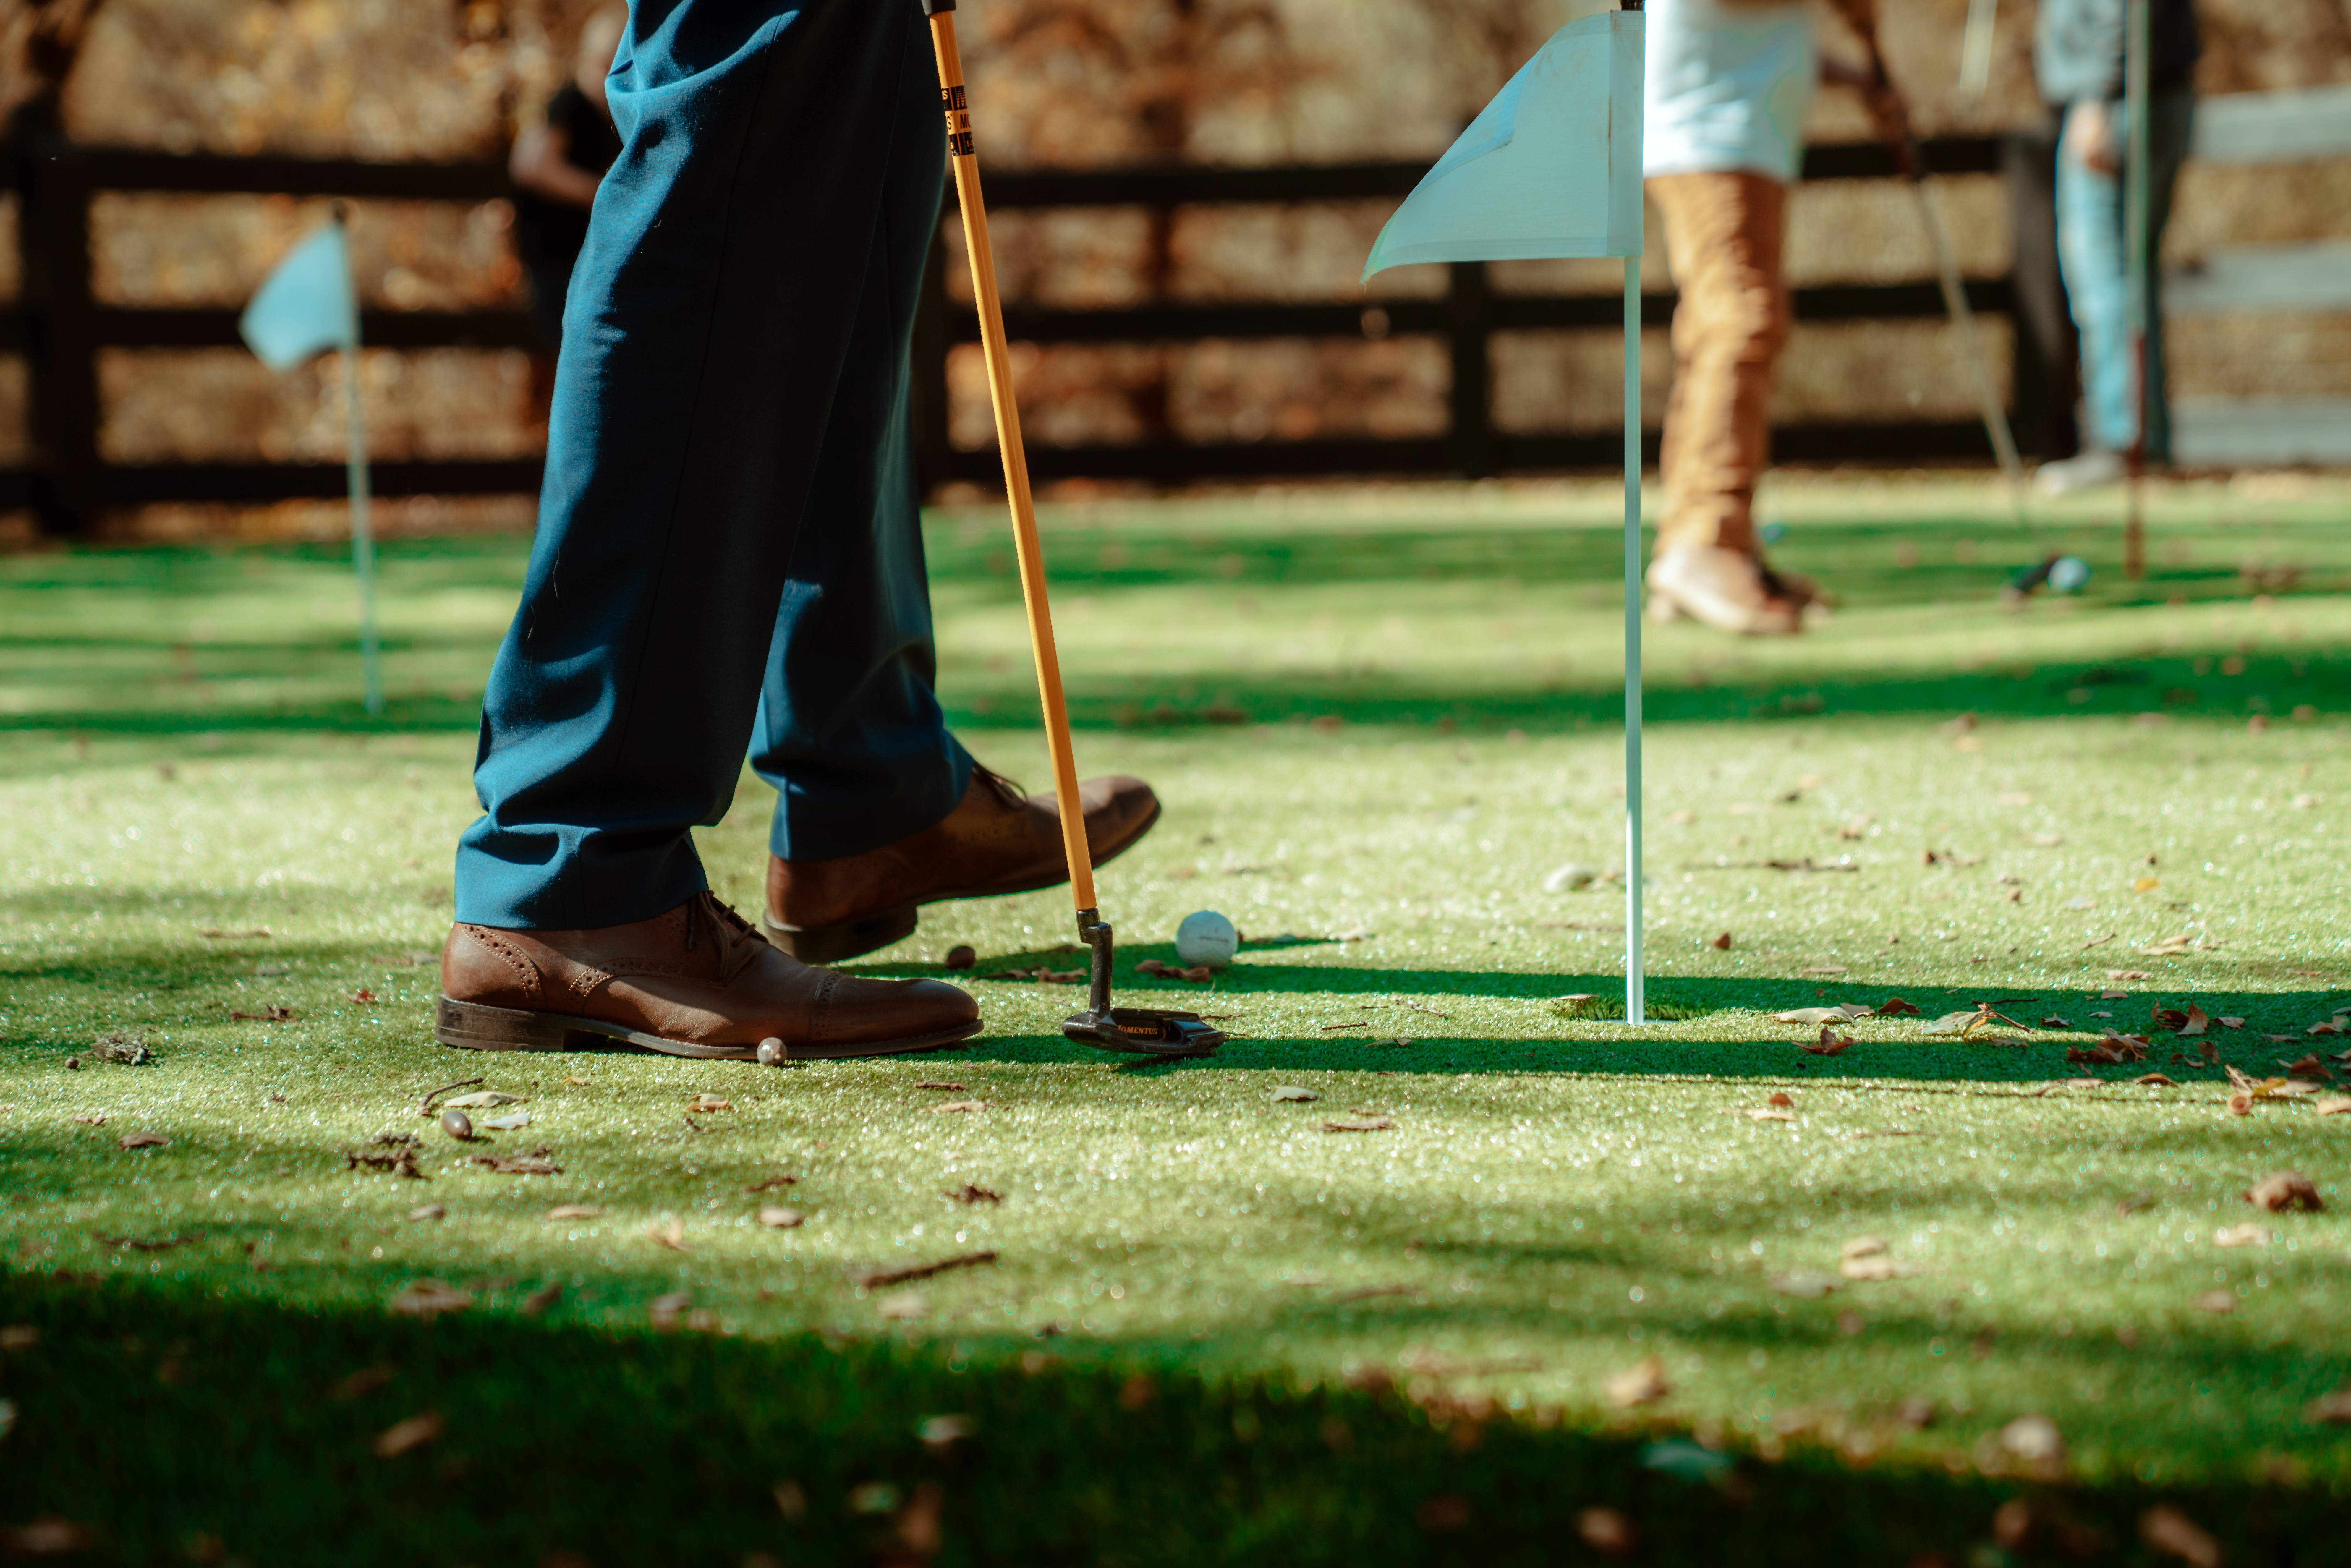 Putting on the green with a golf club and ball at a lawn party.